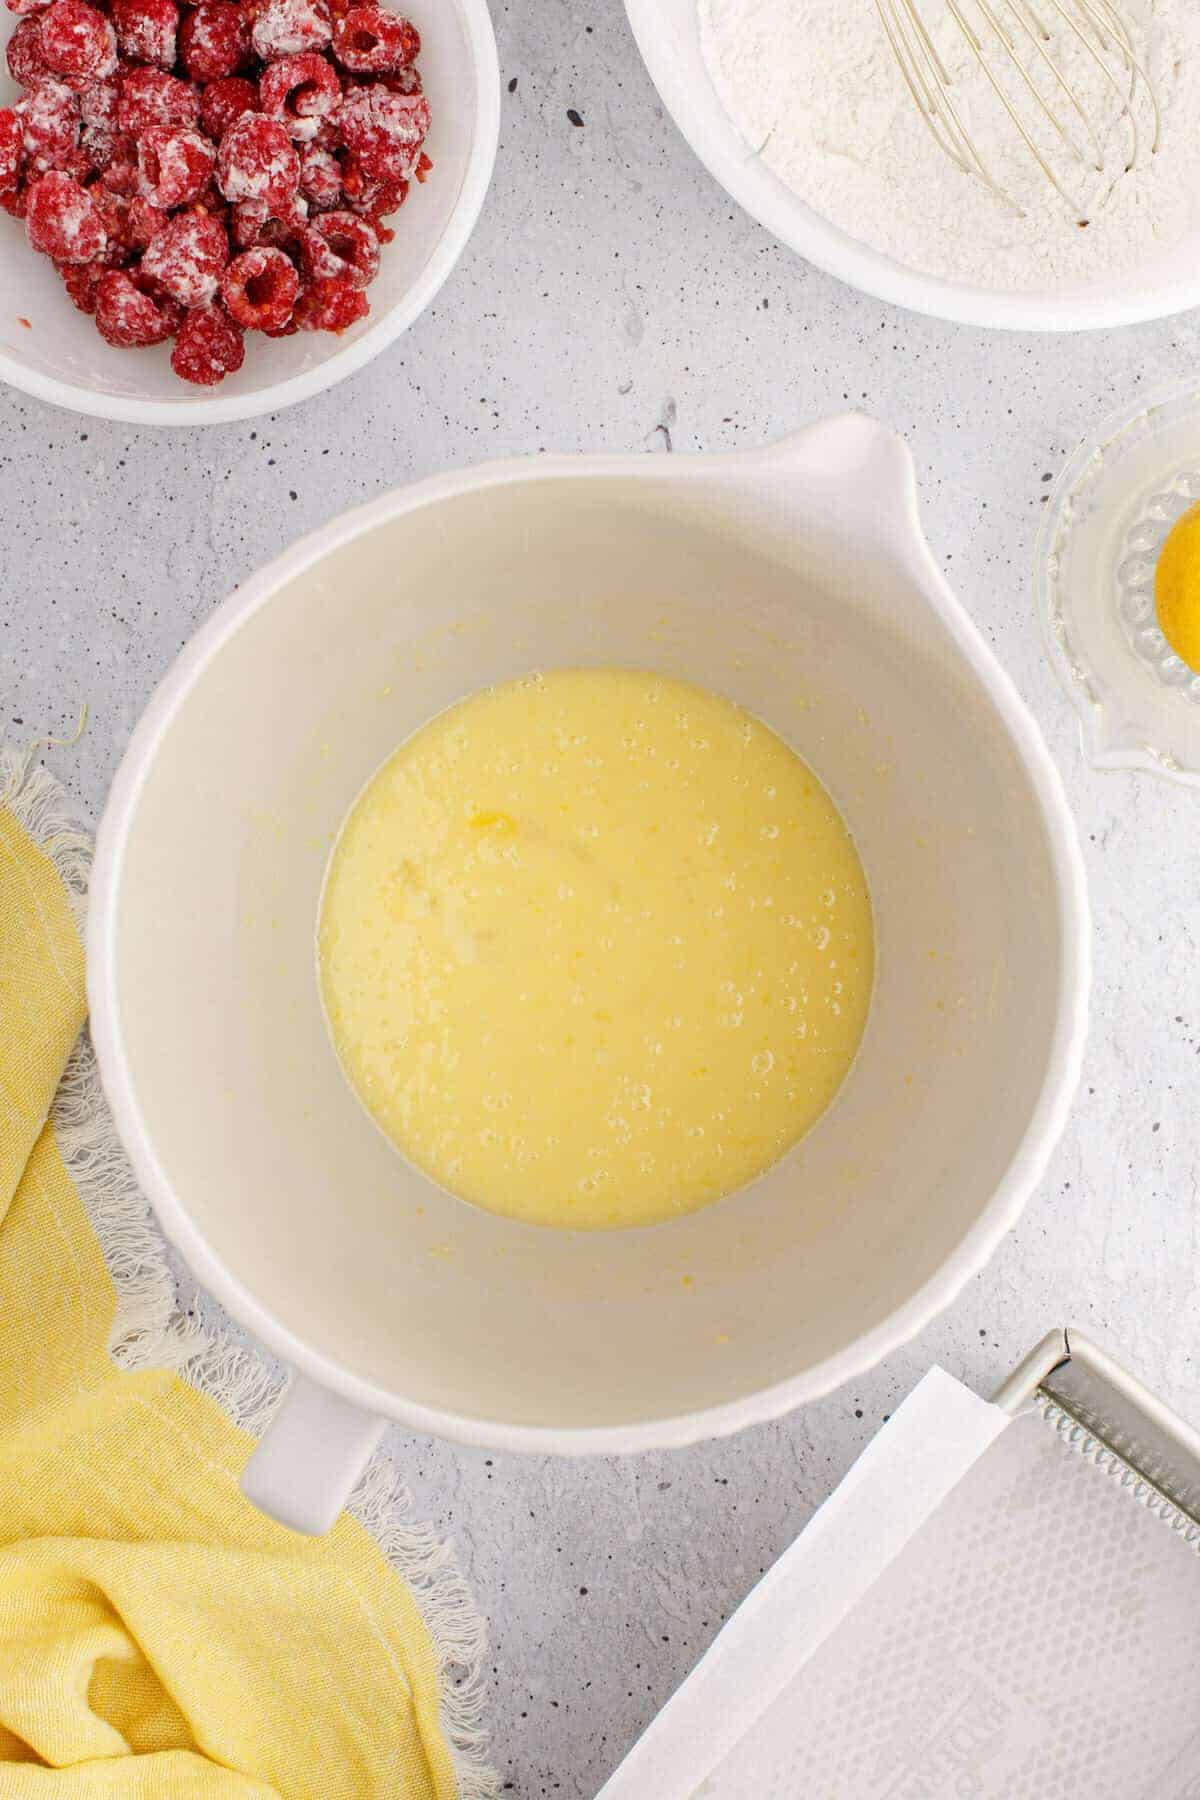 all of the custard like ingredients combined in a mixing bowl.